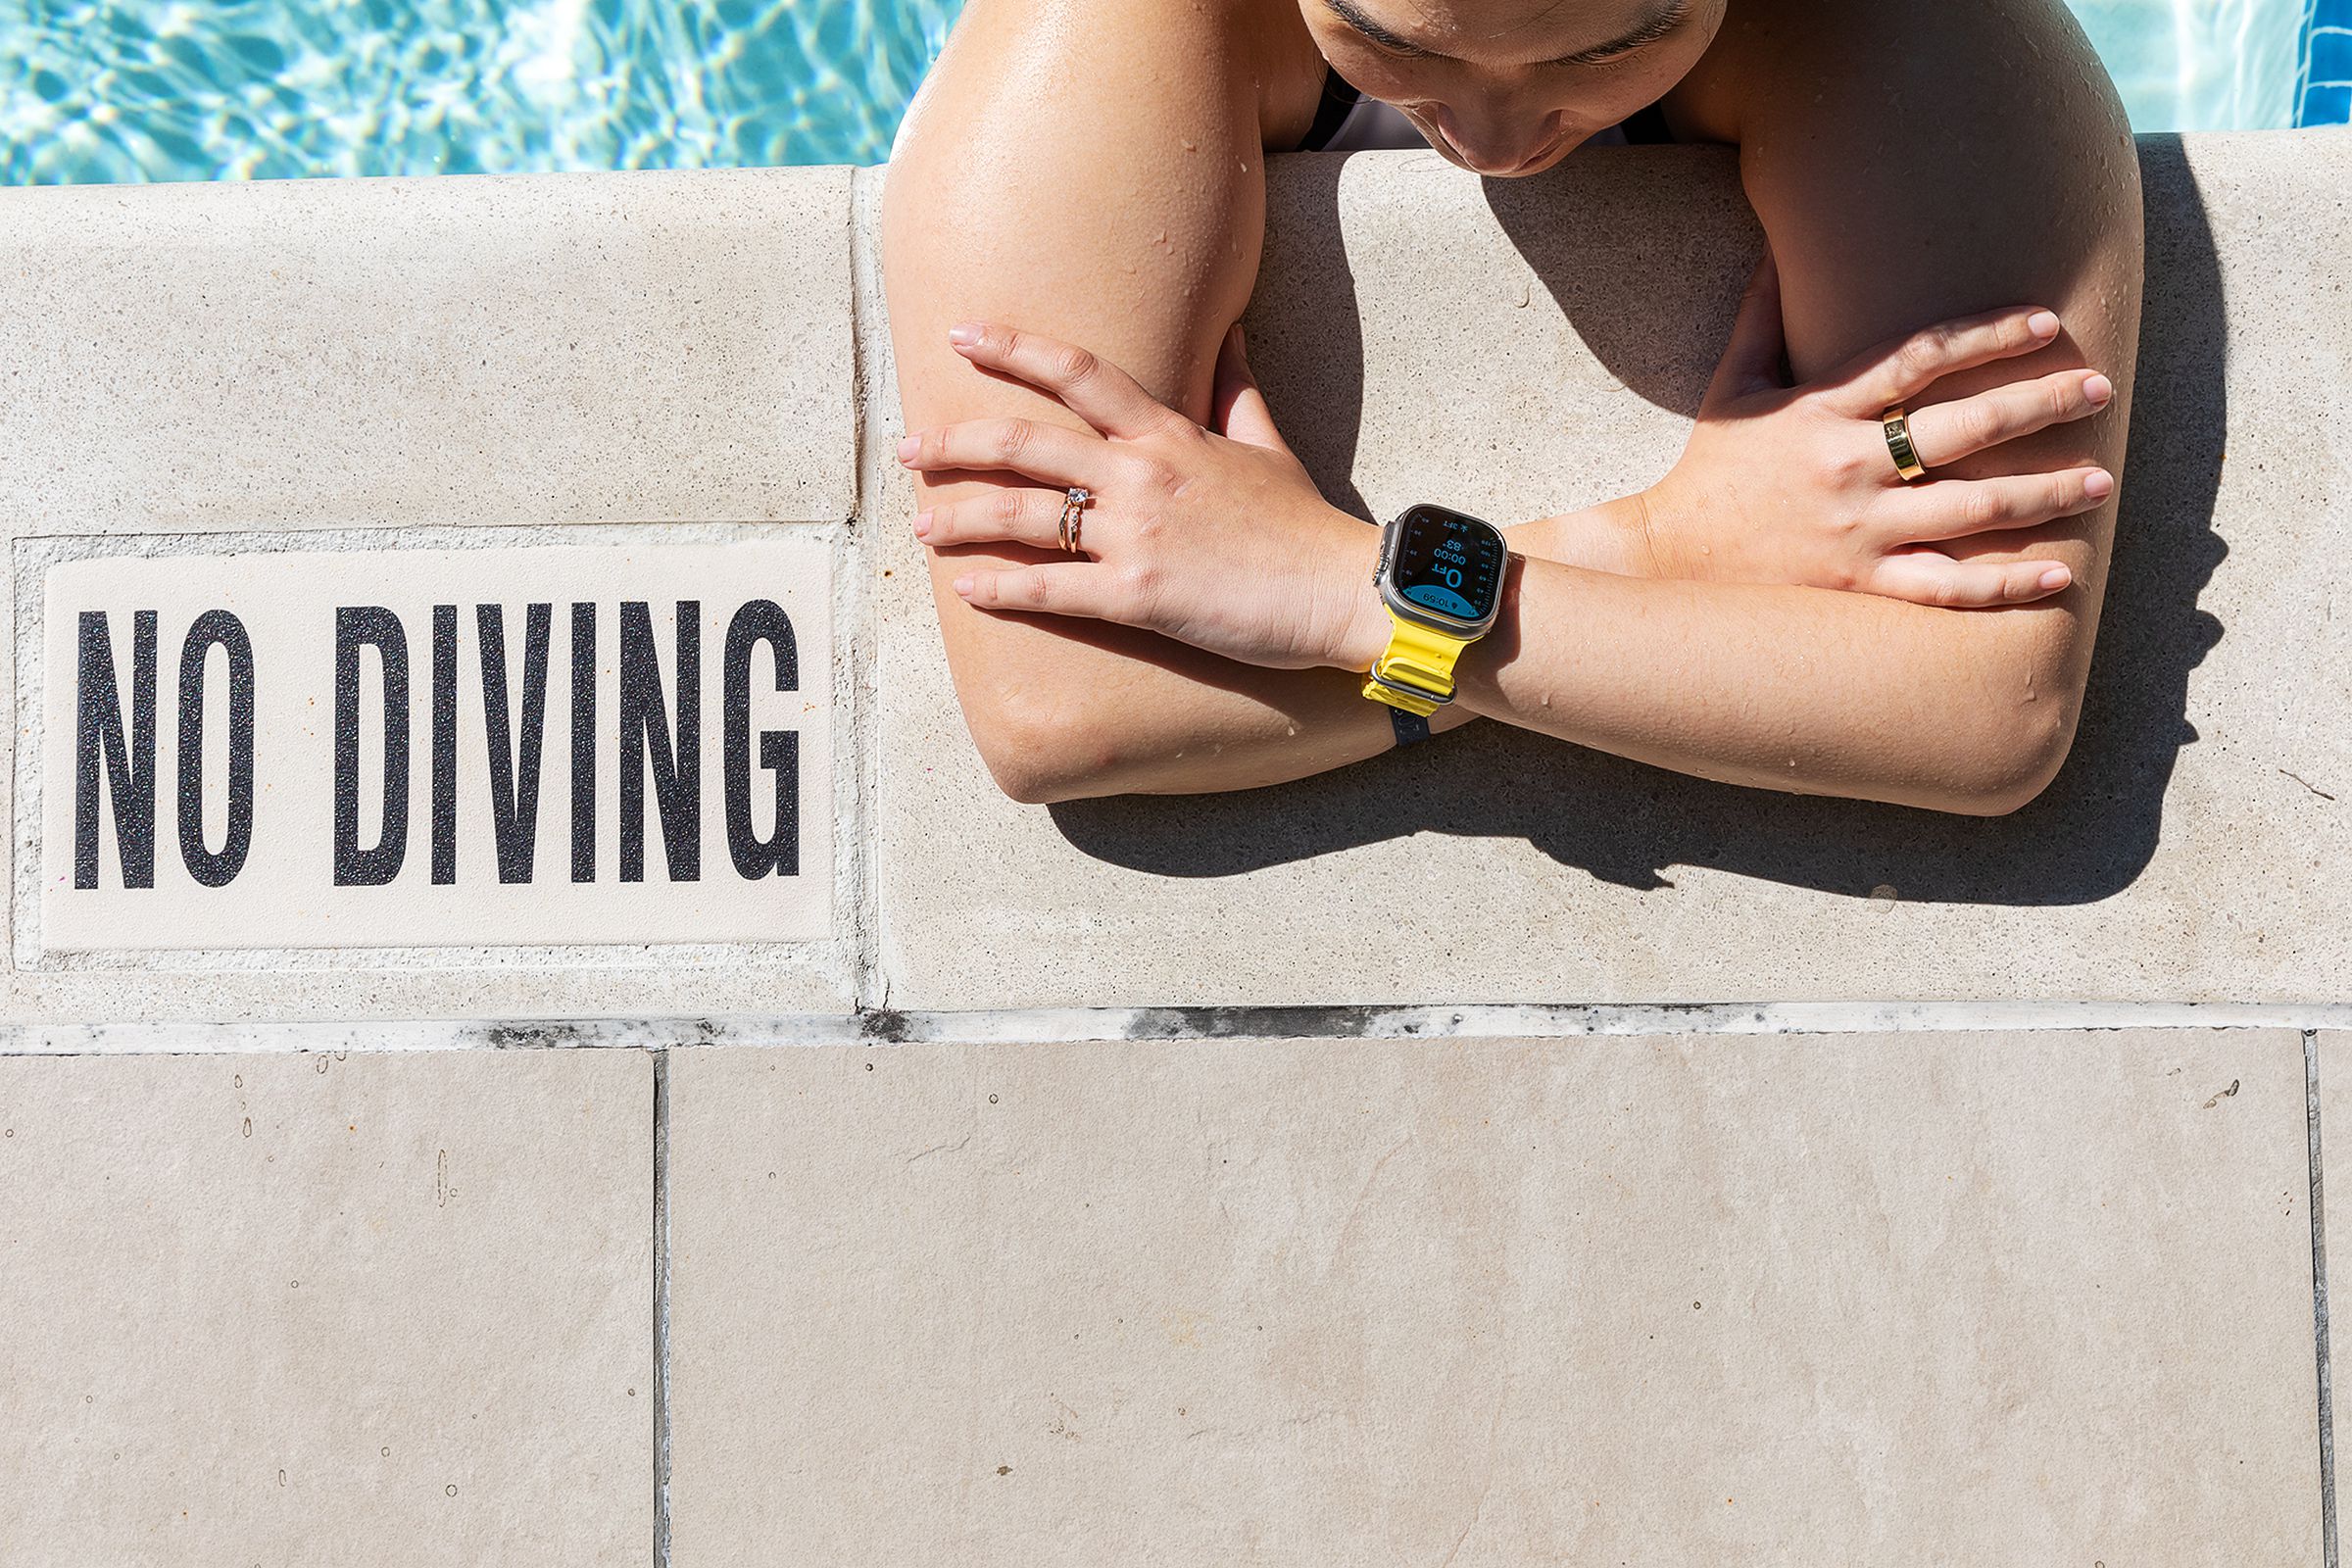 Woman leaning on edge of pool wearing Apple Watch Ultra next to a no diving sign.